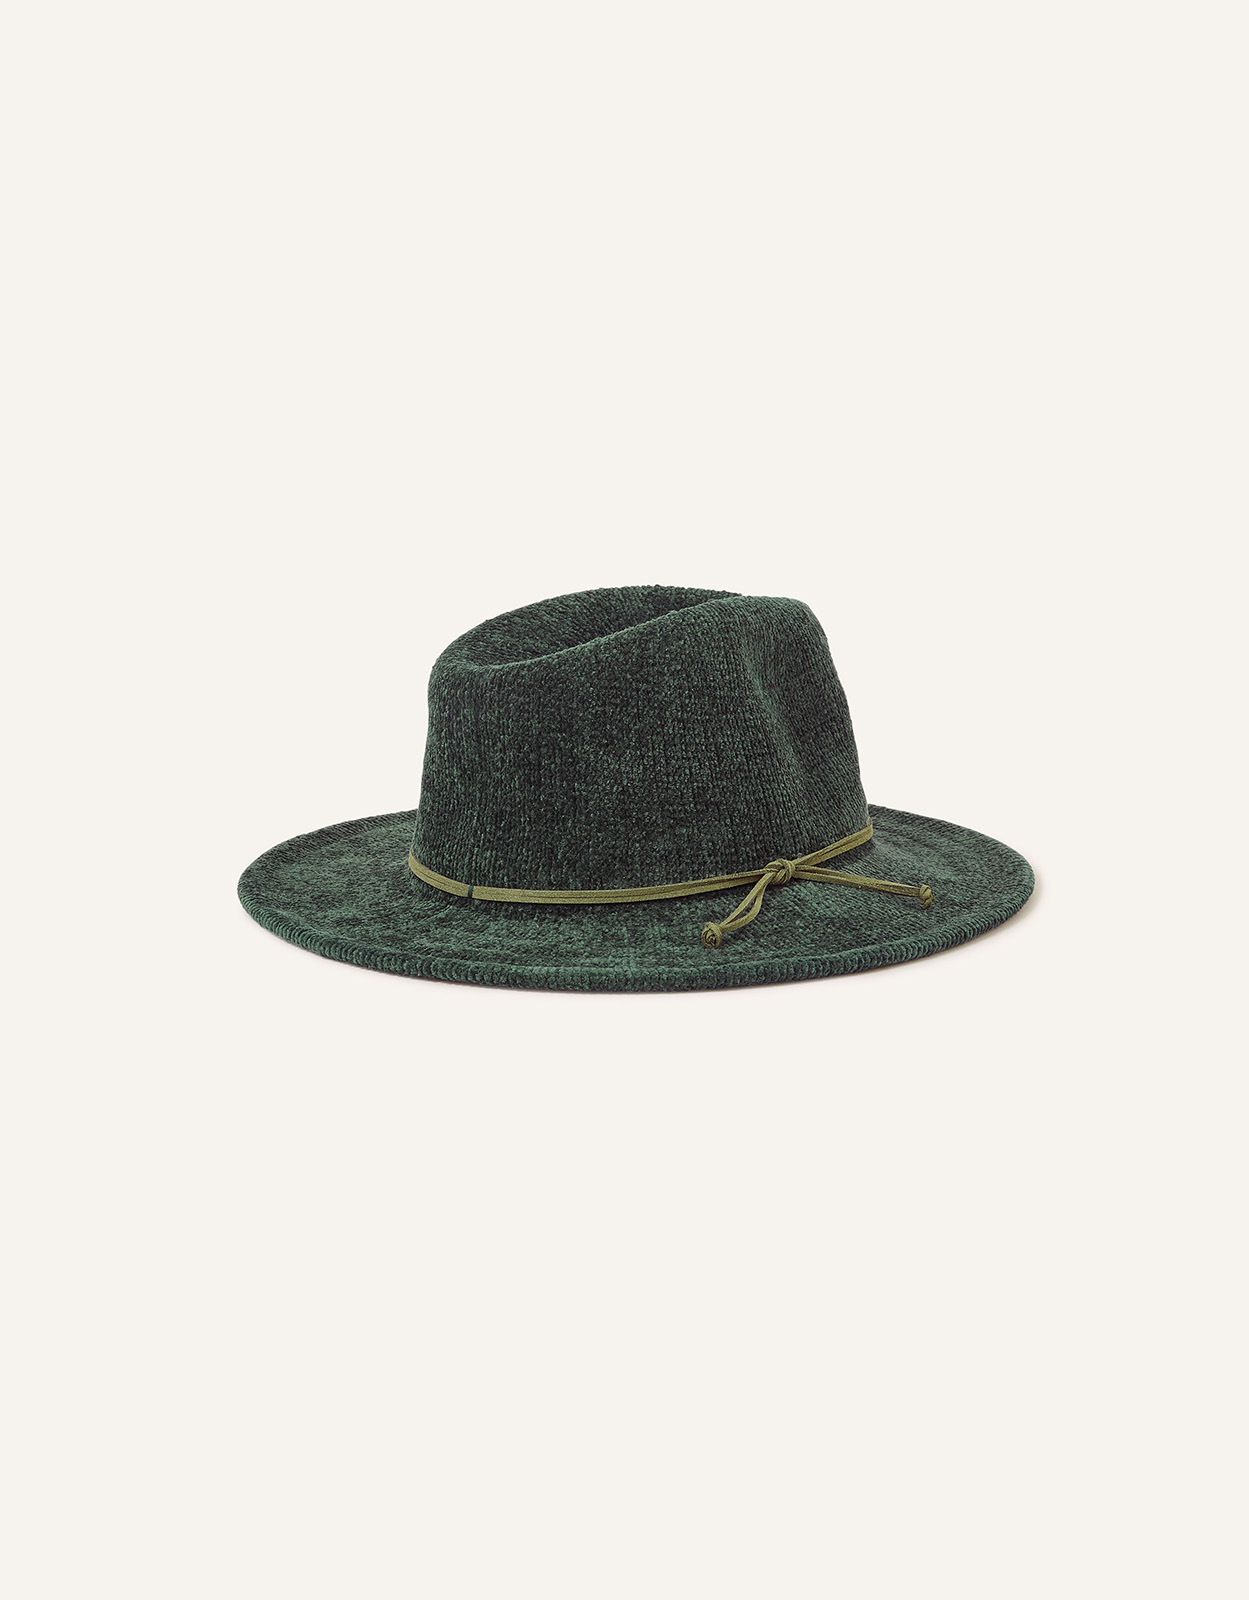 Accessorize Women's Green Must-Have Chenille Packable Fedora, Size: 57cm